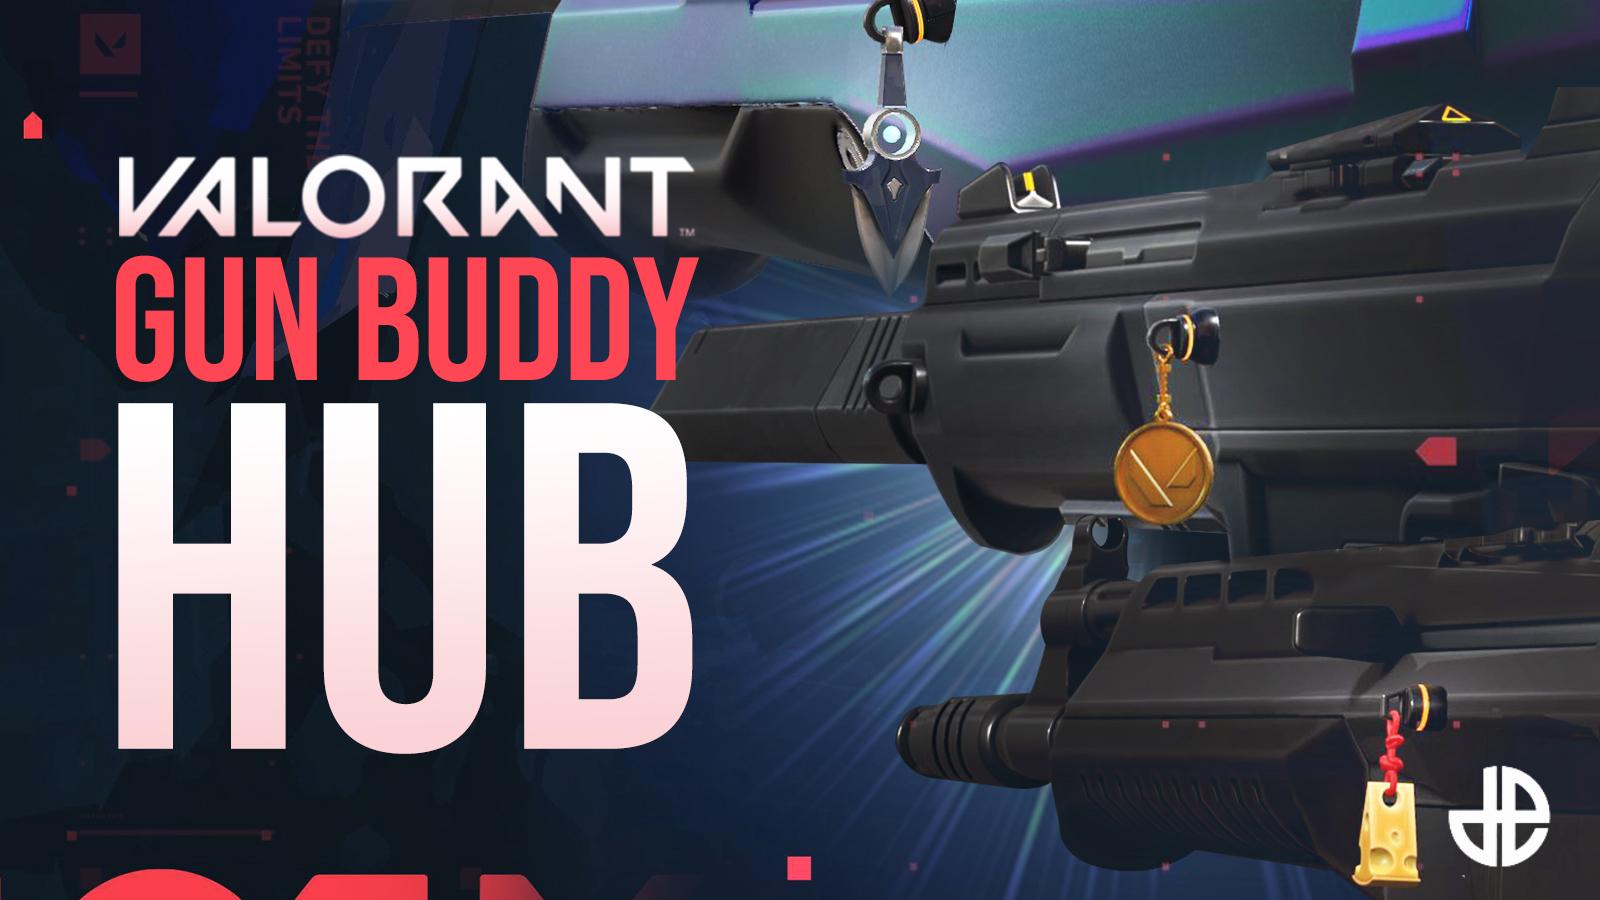 Gun buddies from the bundles and prime gaming : r/VALORANT